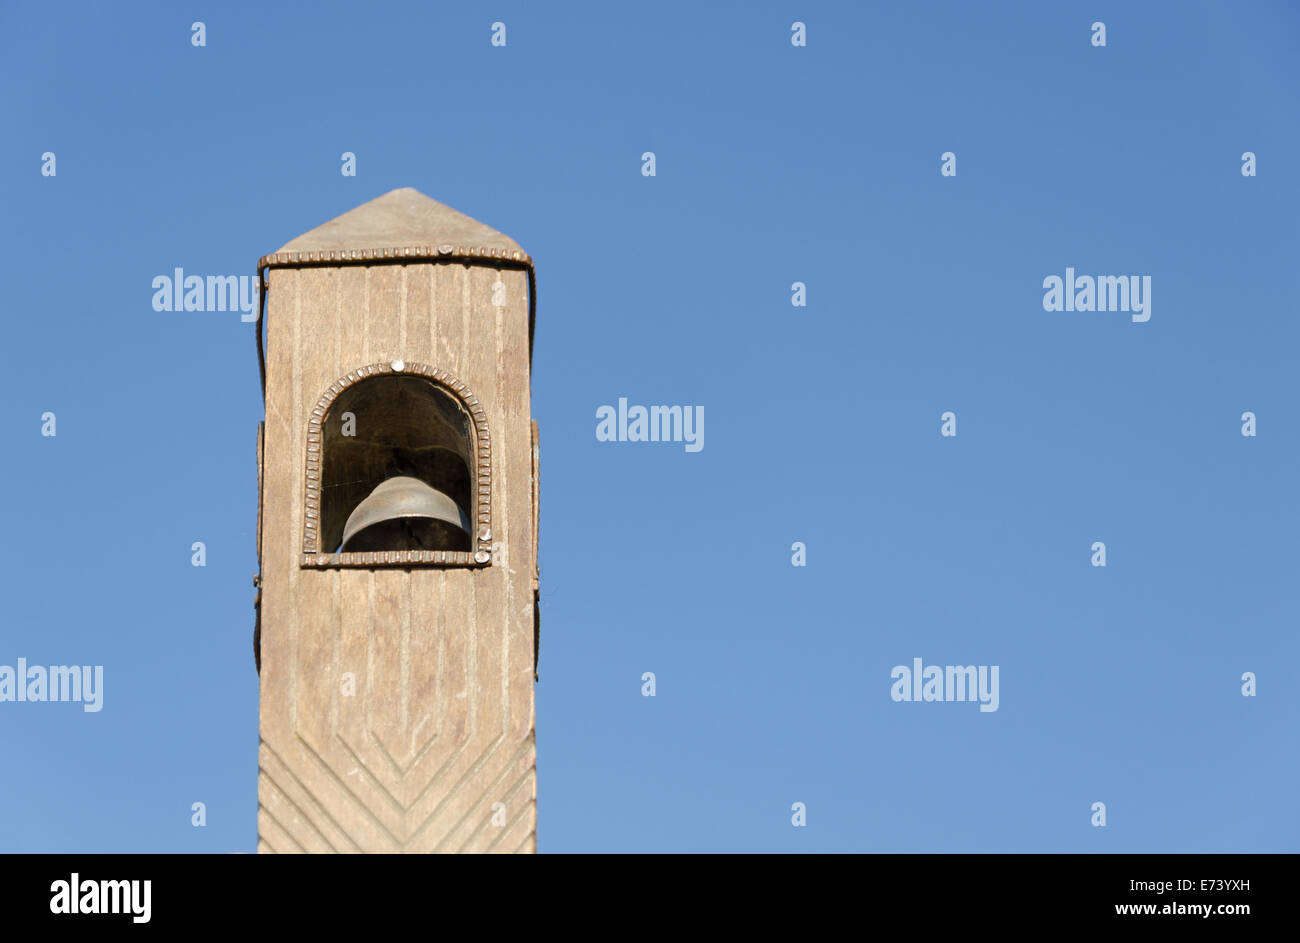 old wooden belfry toy model on blue sky background Stock Photo